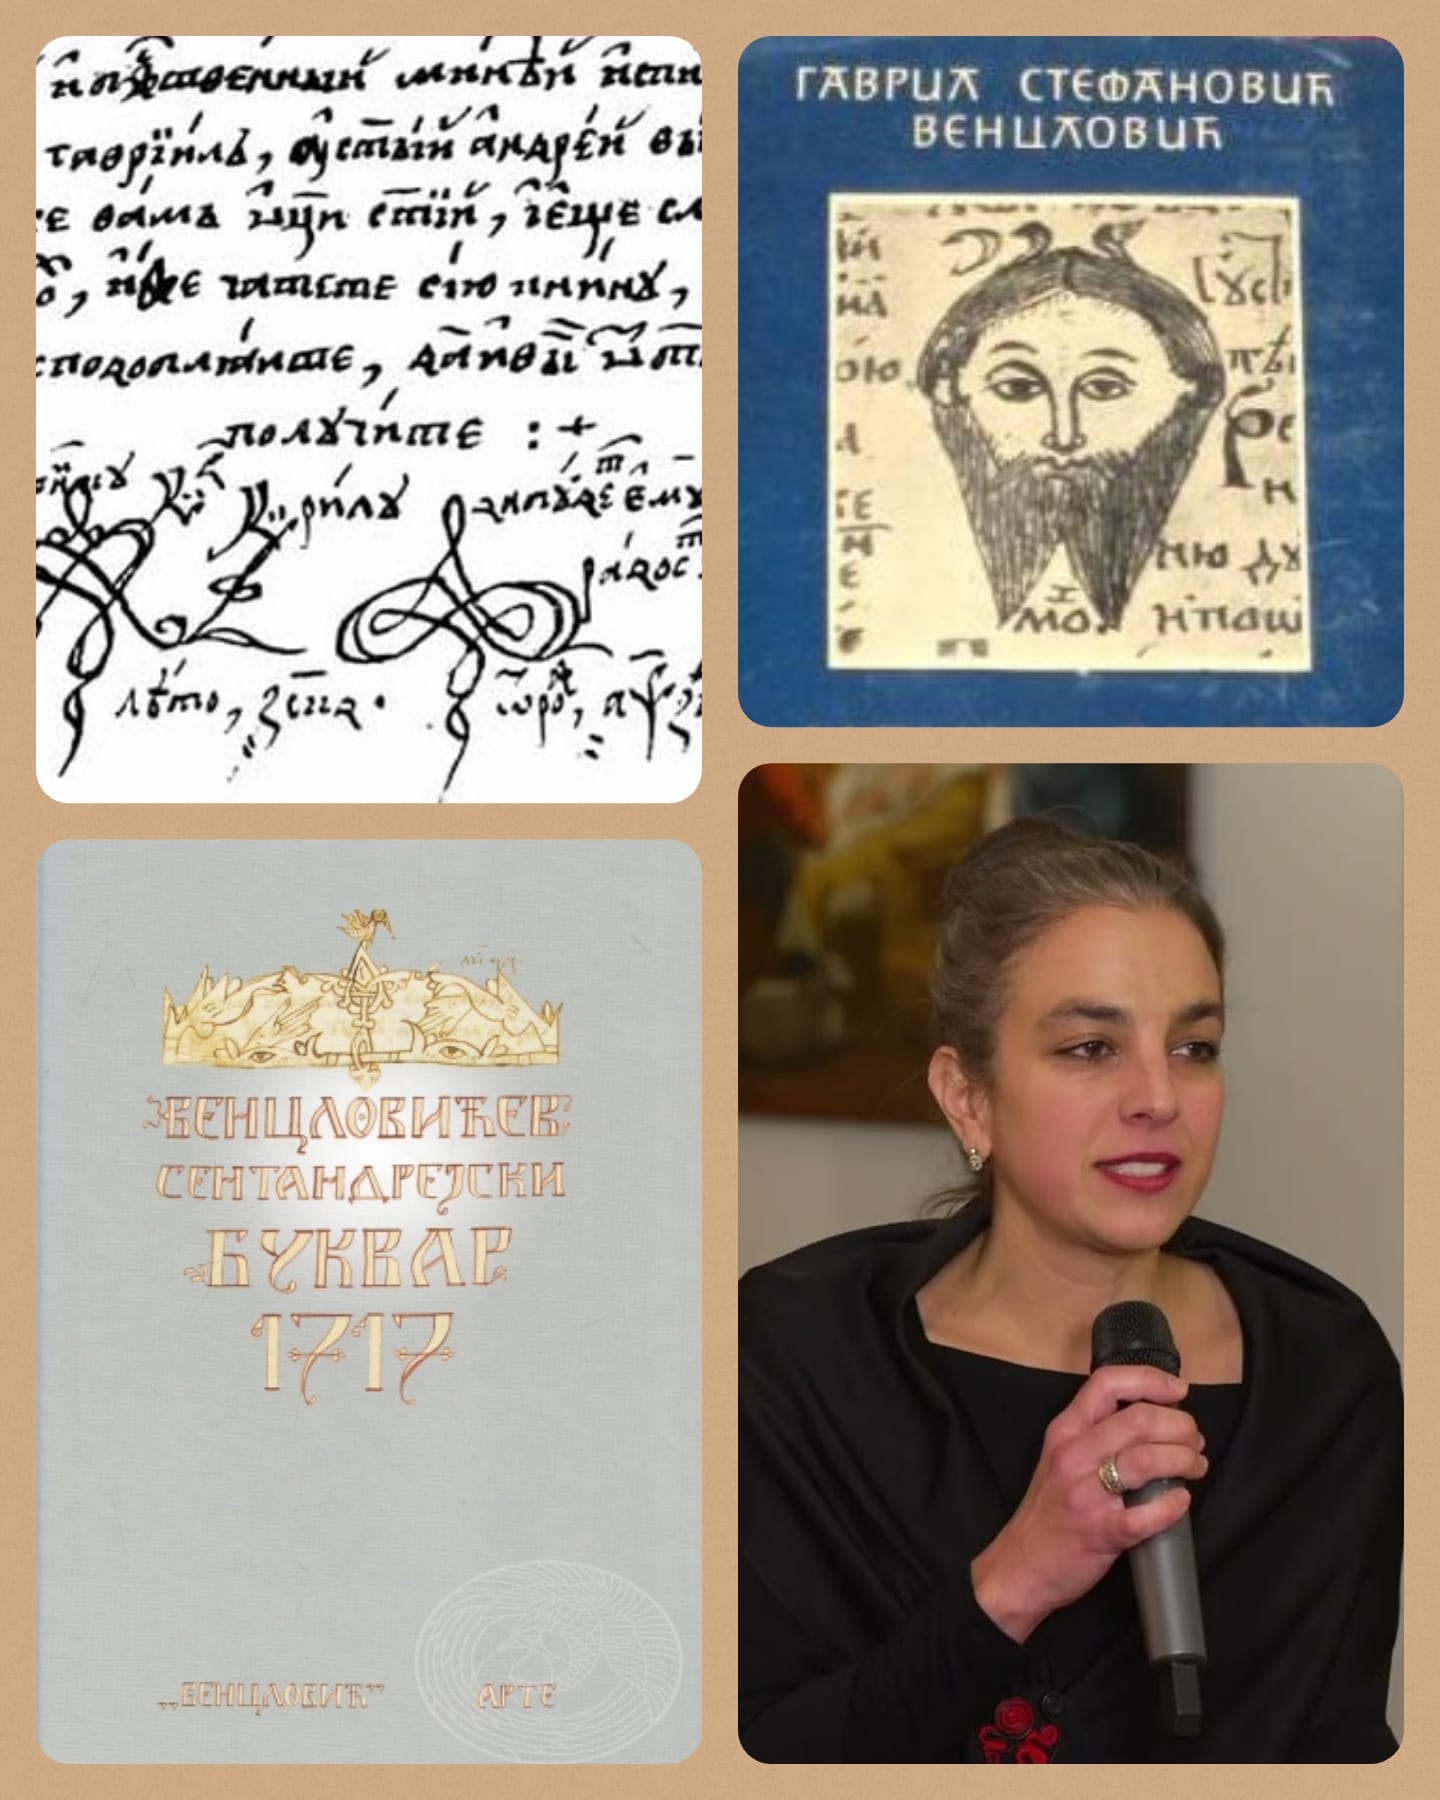 Announcement of the lecture by Milesa Stefanović-Banović, PhD